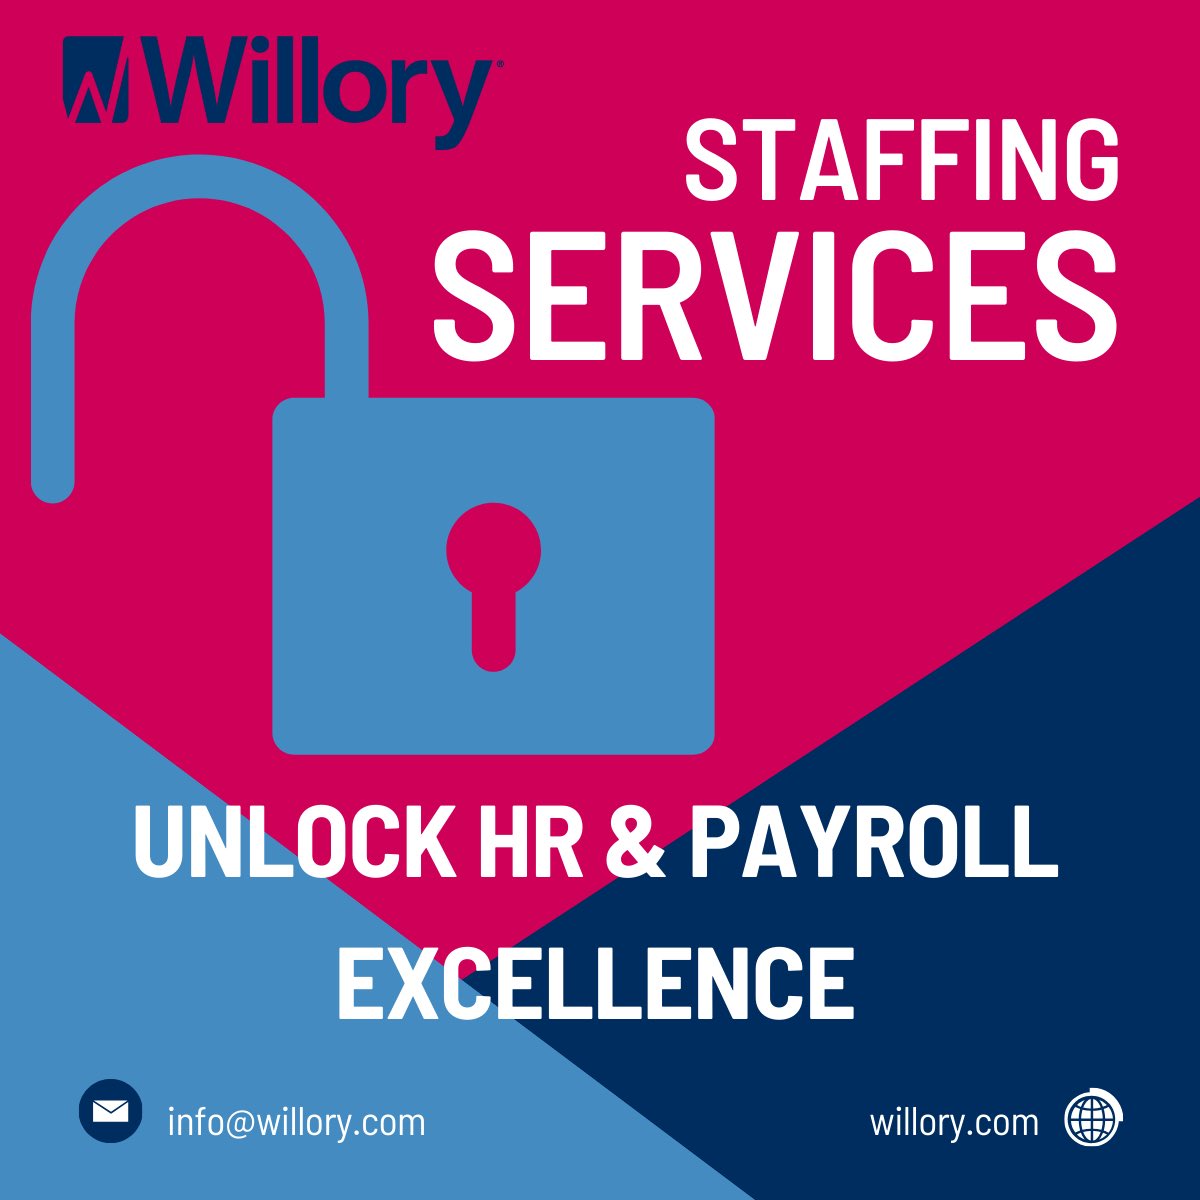 Thrilled to join the Willory team @willory1 today! Thank you John for the warm welcome! @JohnBernatovicz #HR #Recruiter #HRtech #staffing #consulting #payroll #executivesearch #recruiting #payroll